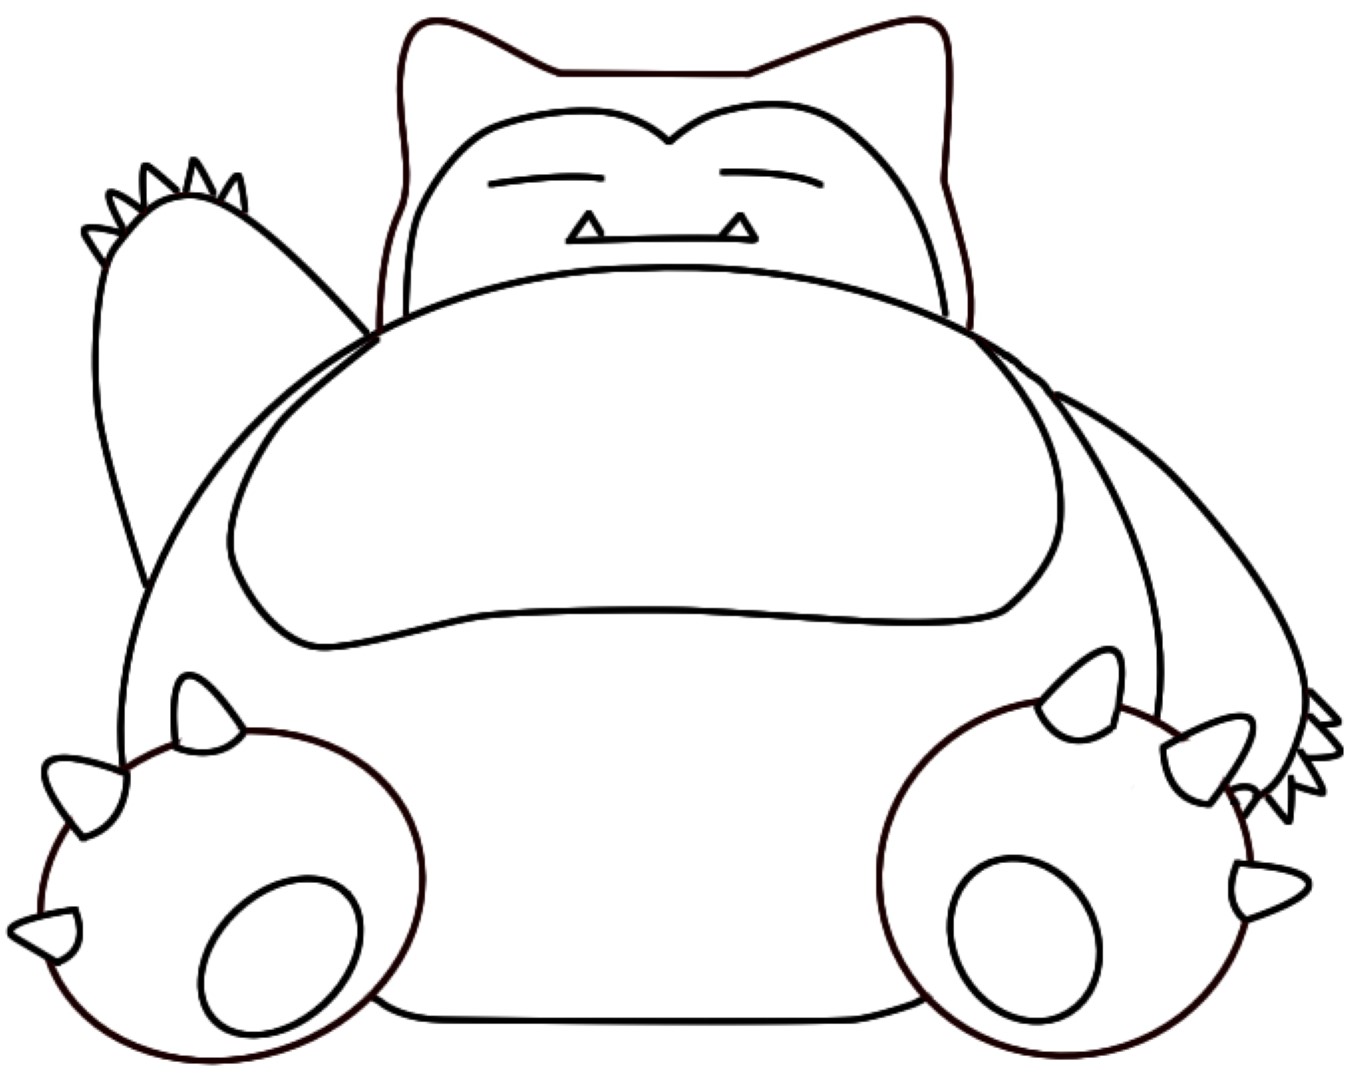 pokemon-coloring-pages-snorlax-at-getcolorings-free-printable-colorings-pages-to-print-and